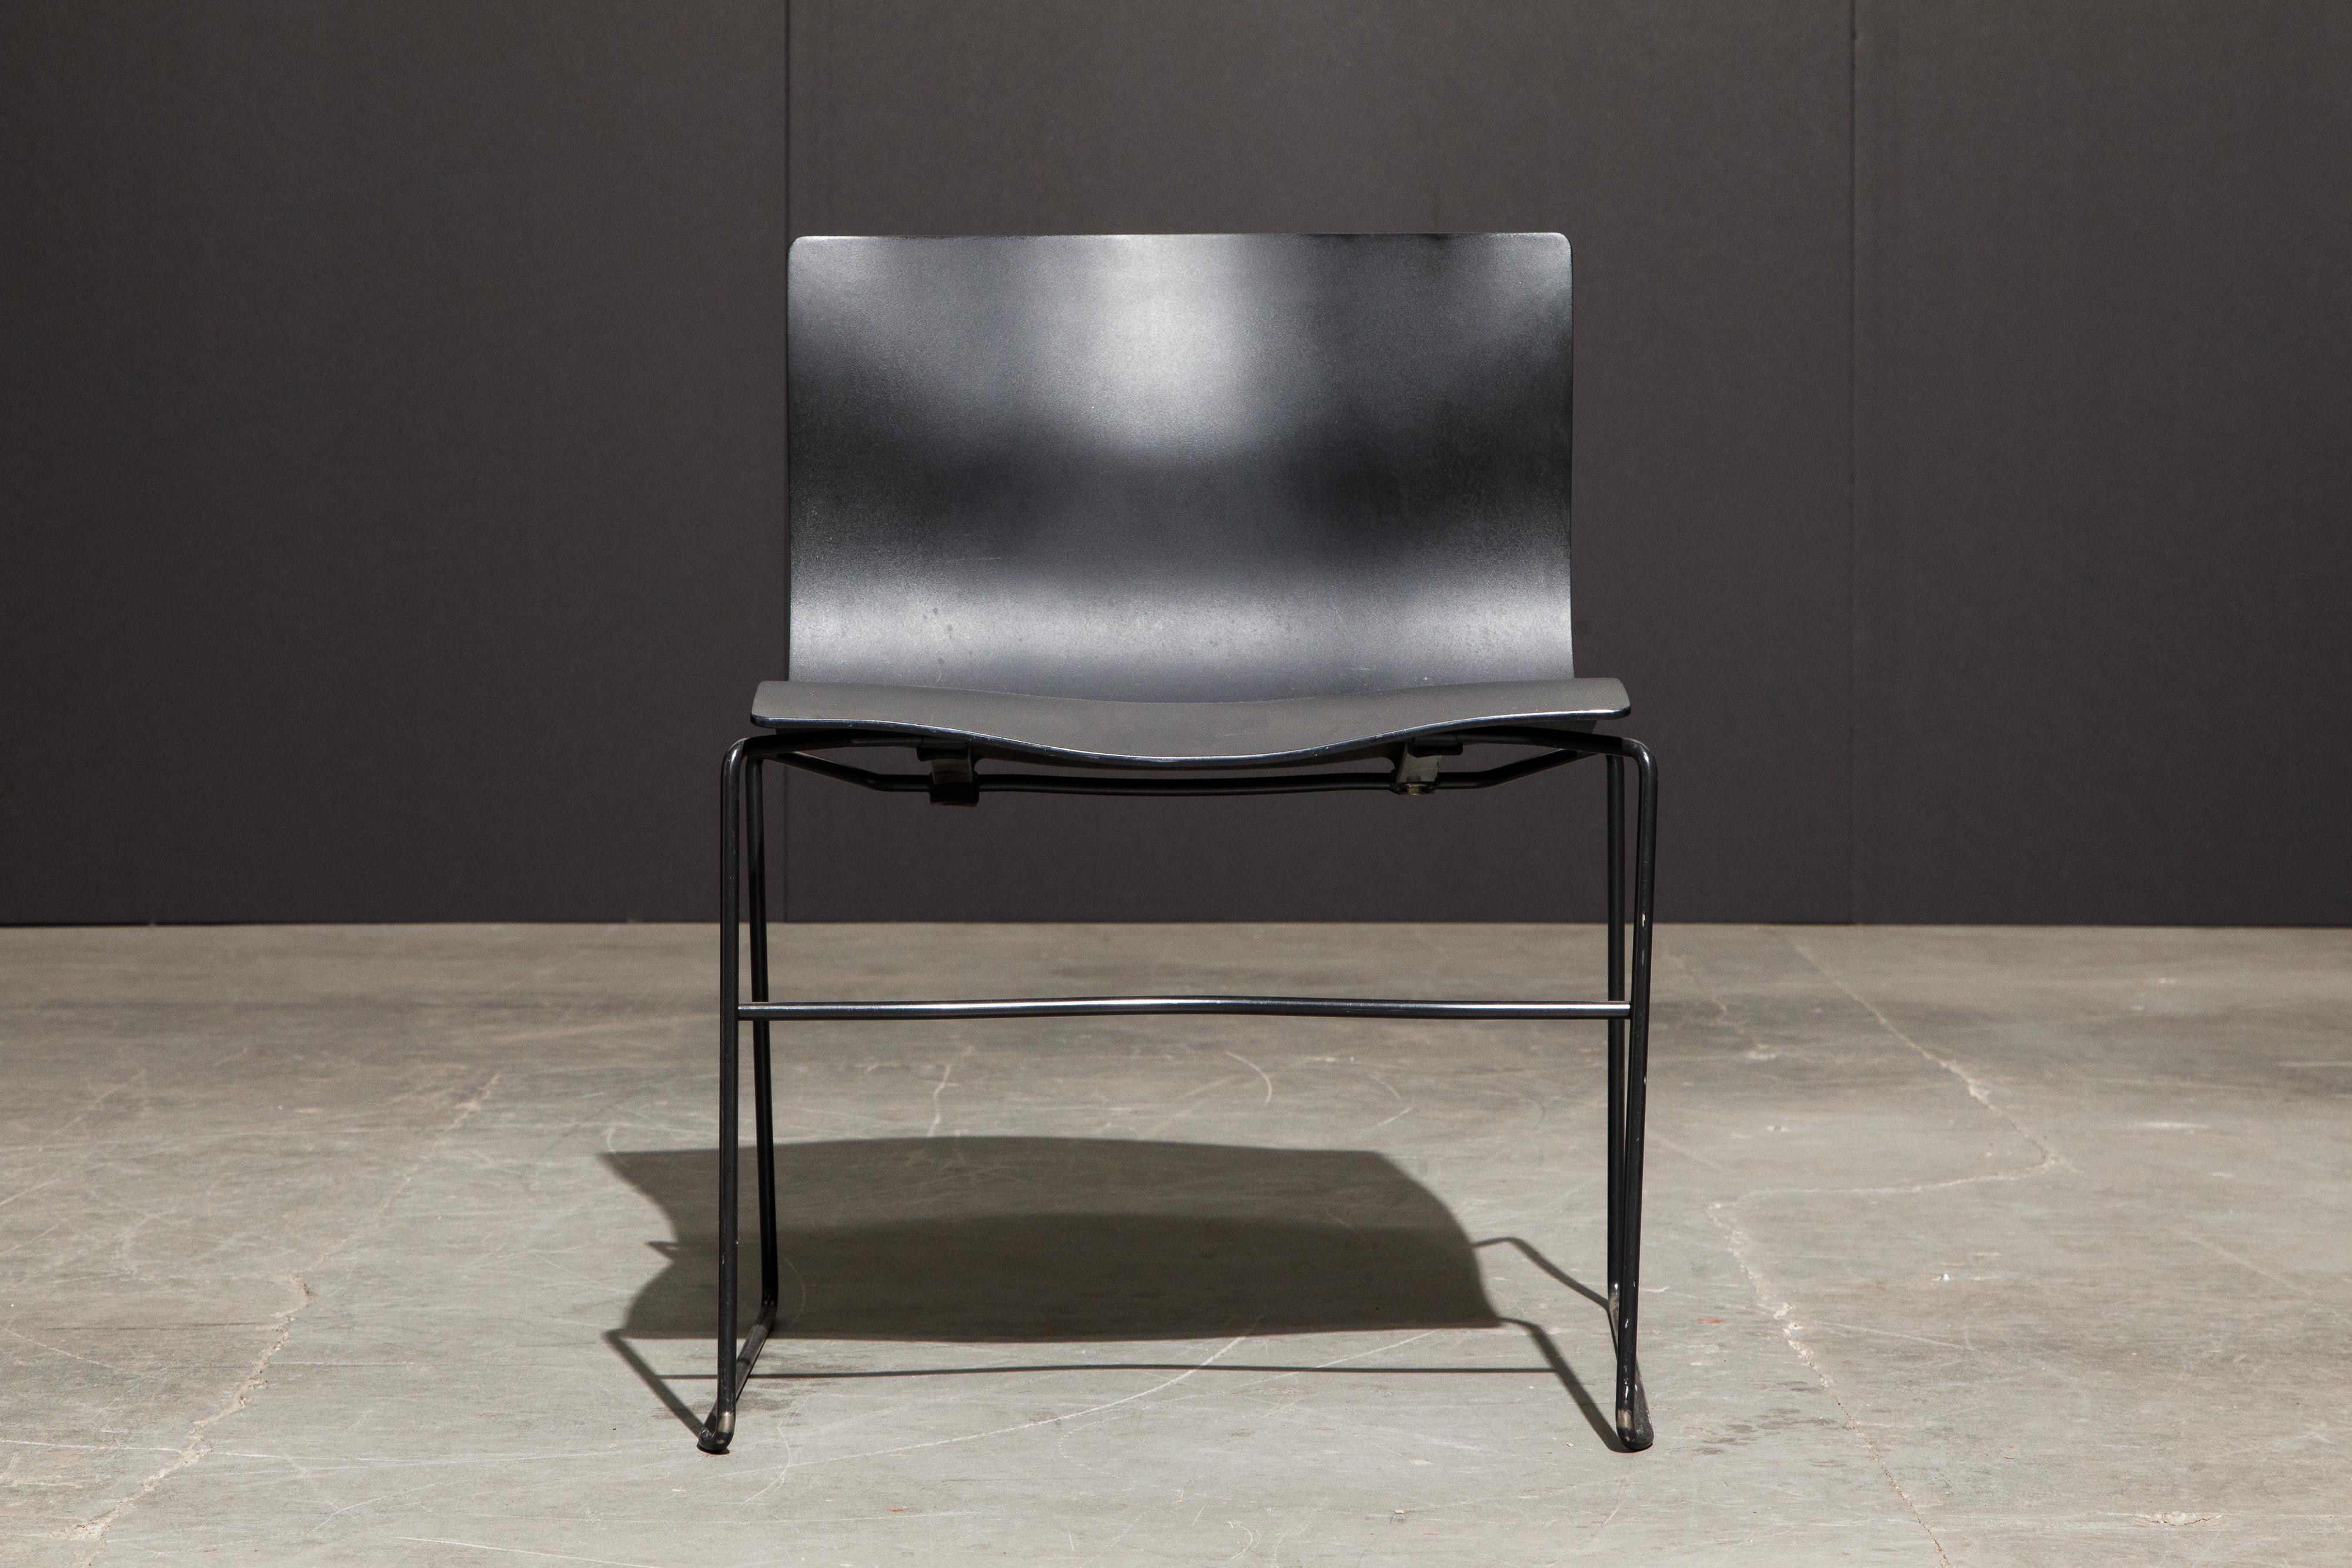 This classic Post-Modern design by Massimo and Lella Vignelli for Knoll International is called the 'Handkerchief' stacking chair, labelled underneath with early production (original) year labels. We have over 60 of these available, in black powder